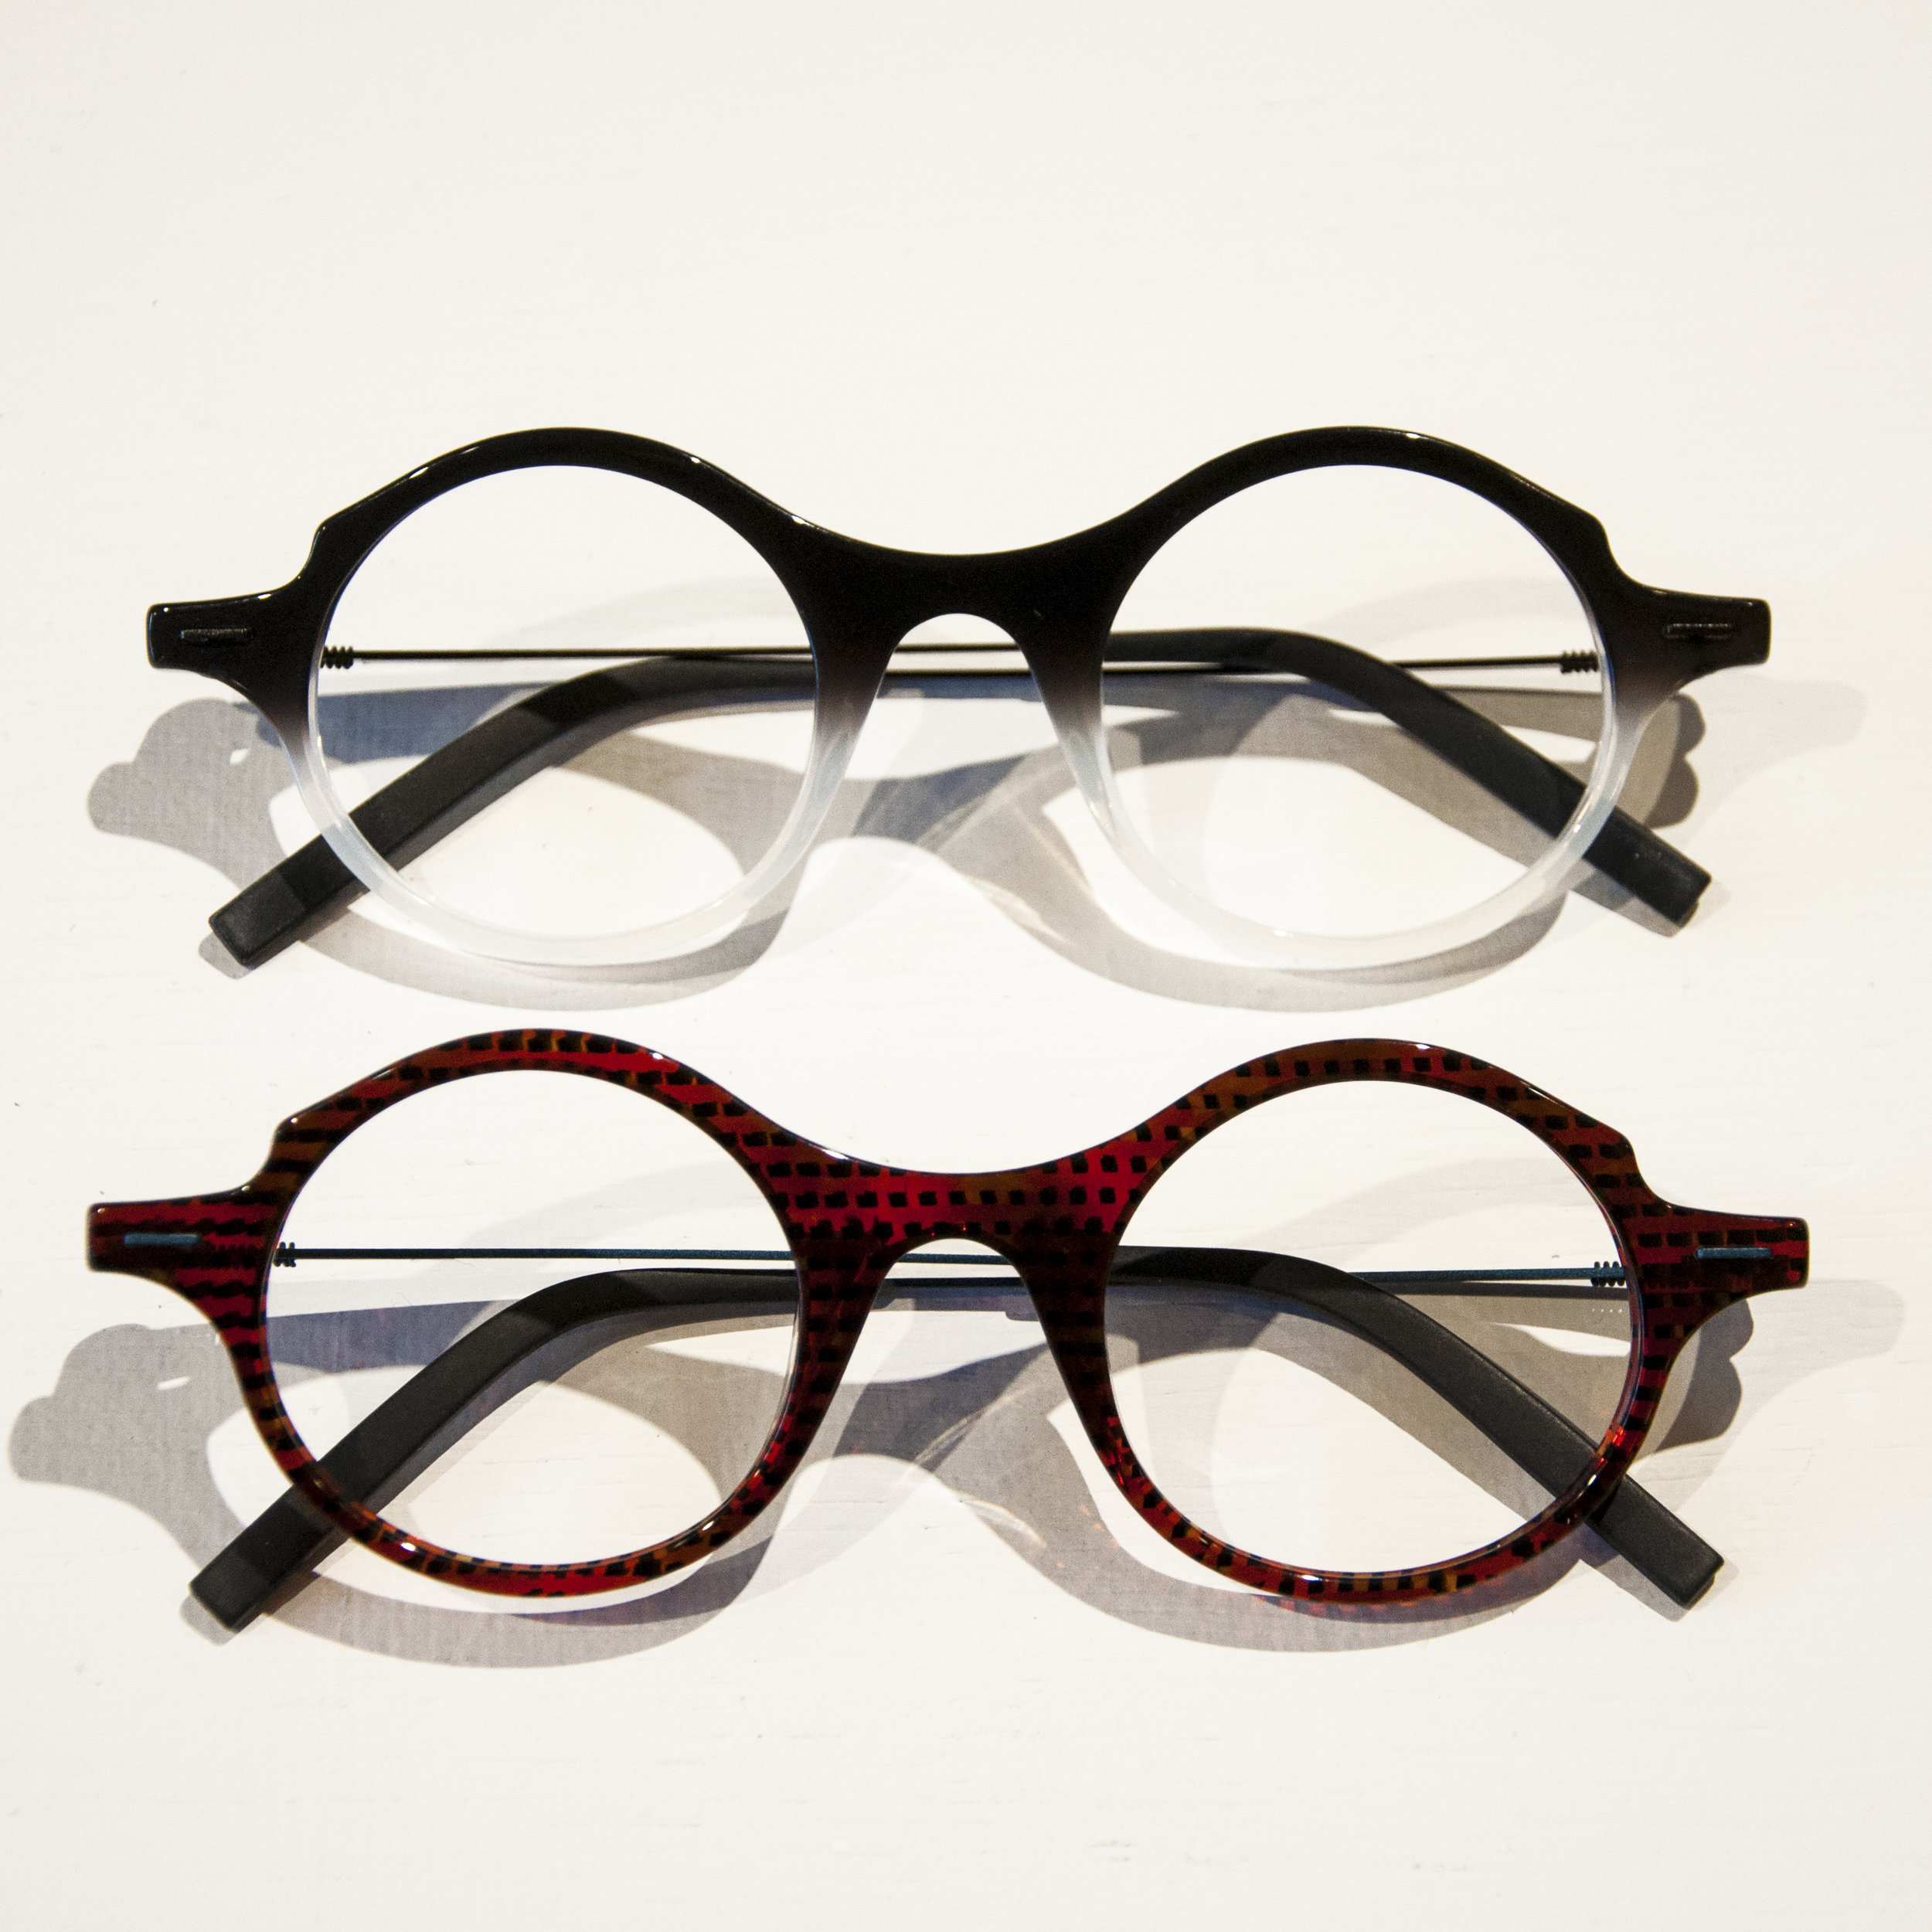 atelier mira-THEO ROCK'N'ROLL CASE optical boutique featuring handcrafted  eyewear, sunglasses, and fine goods